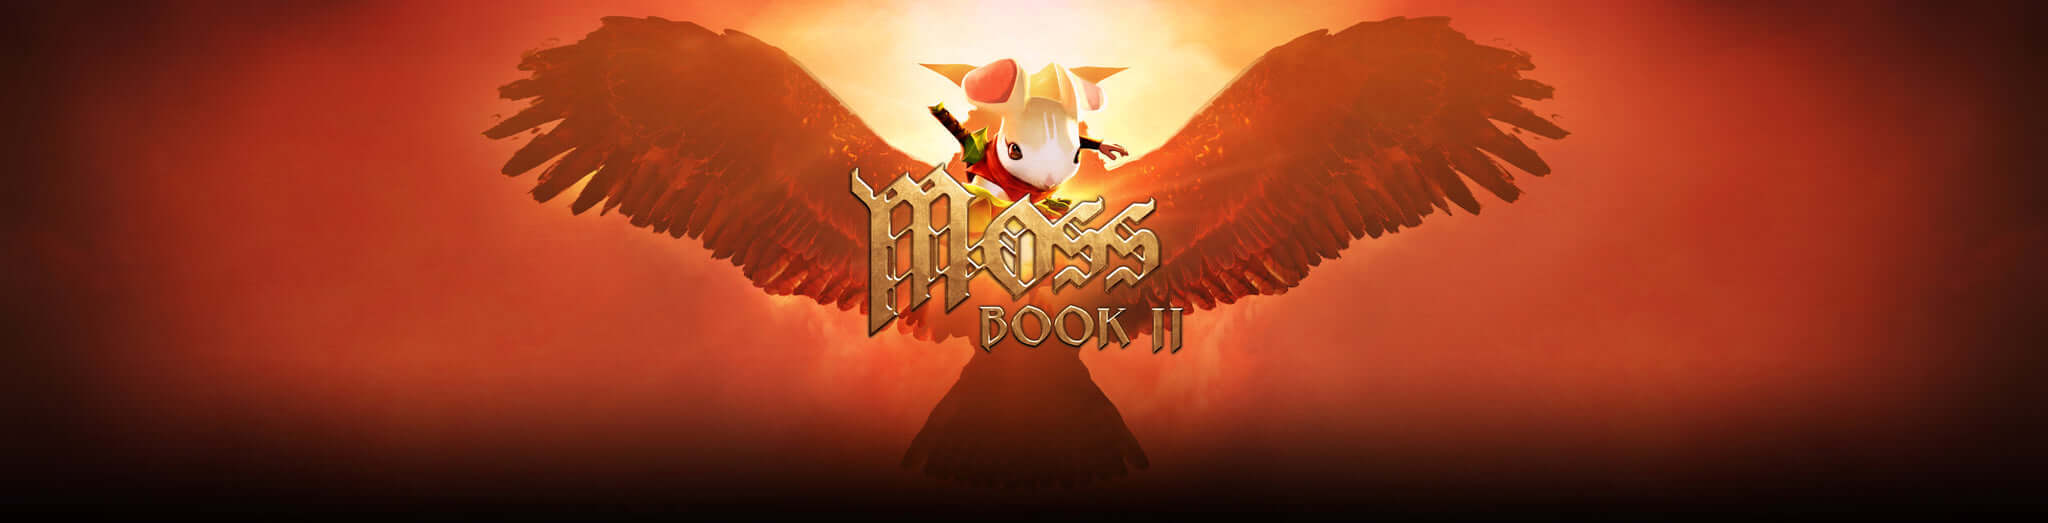 ‘Moss: Book II’ Will Be Bigger Than the Original, Introduce New Progression & Interactions